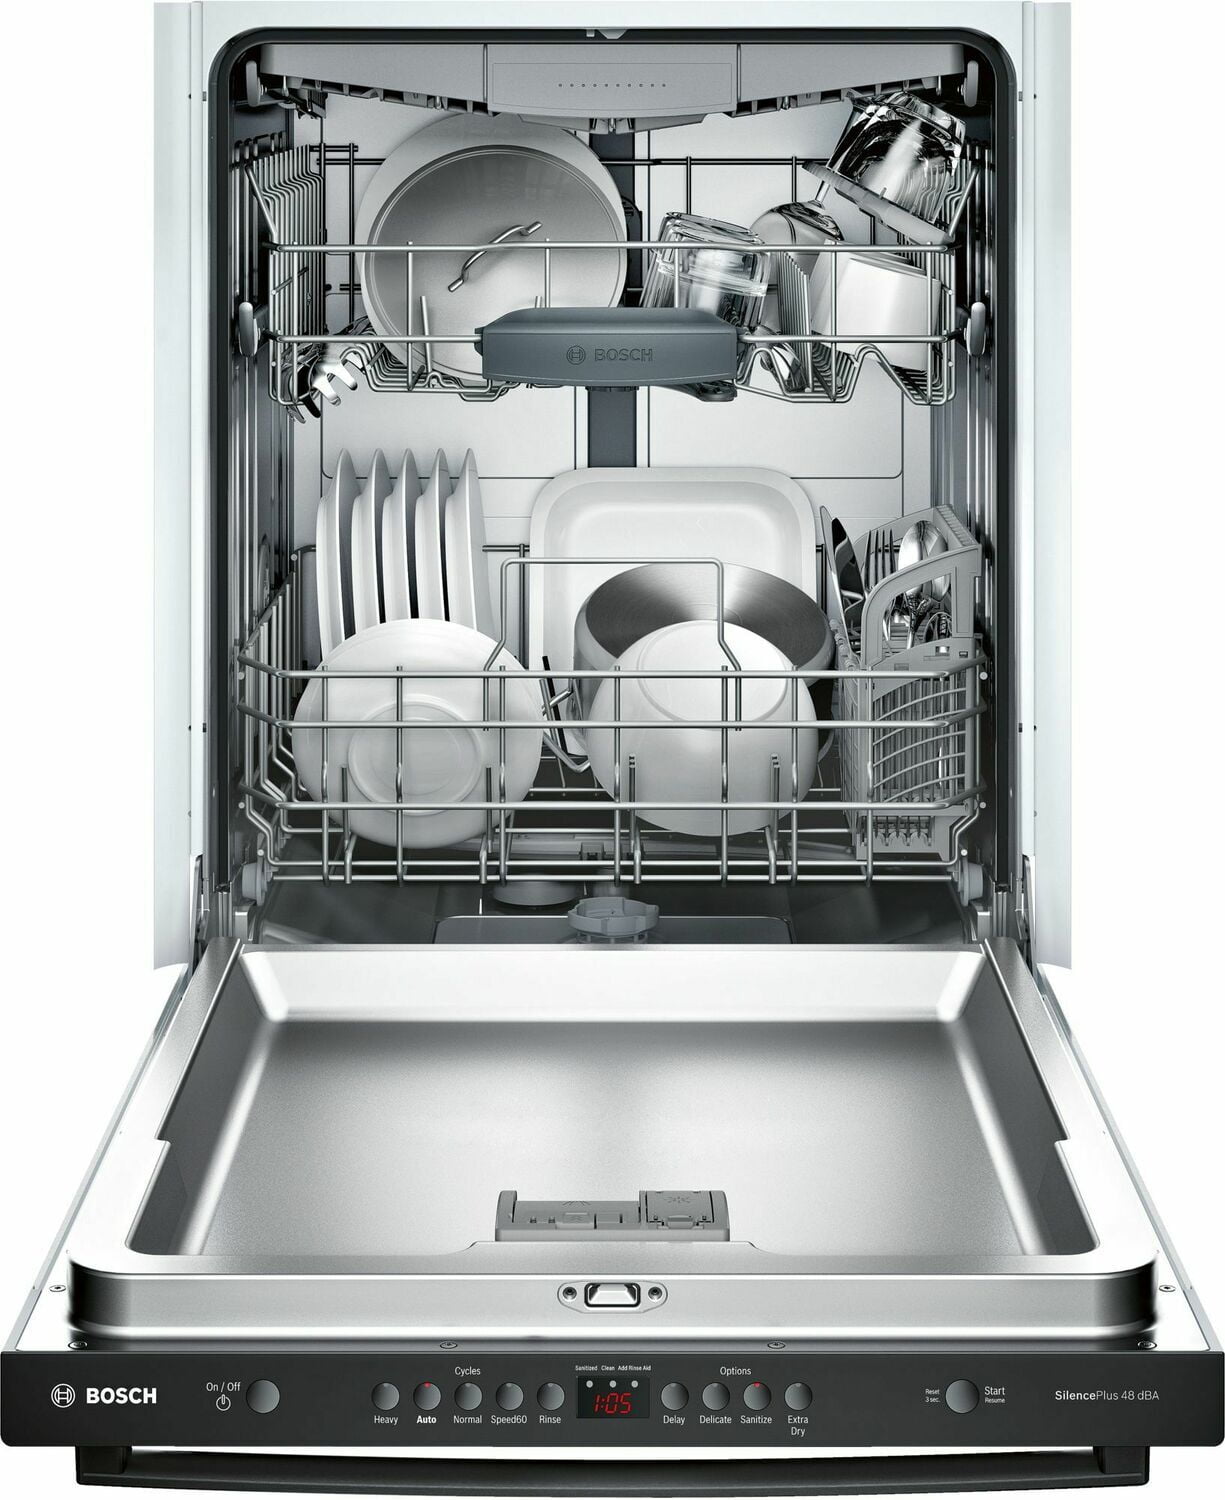 HAVA R01 Countertop Dishwasher for Apartments, RVs, and Limited Spaces